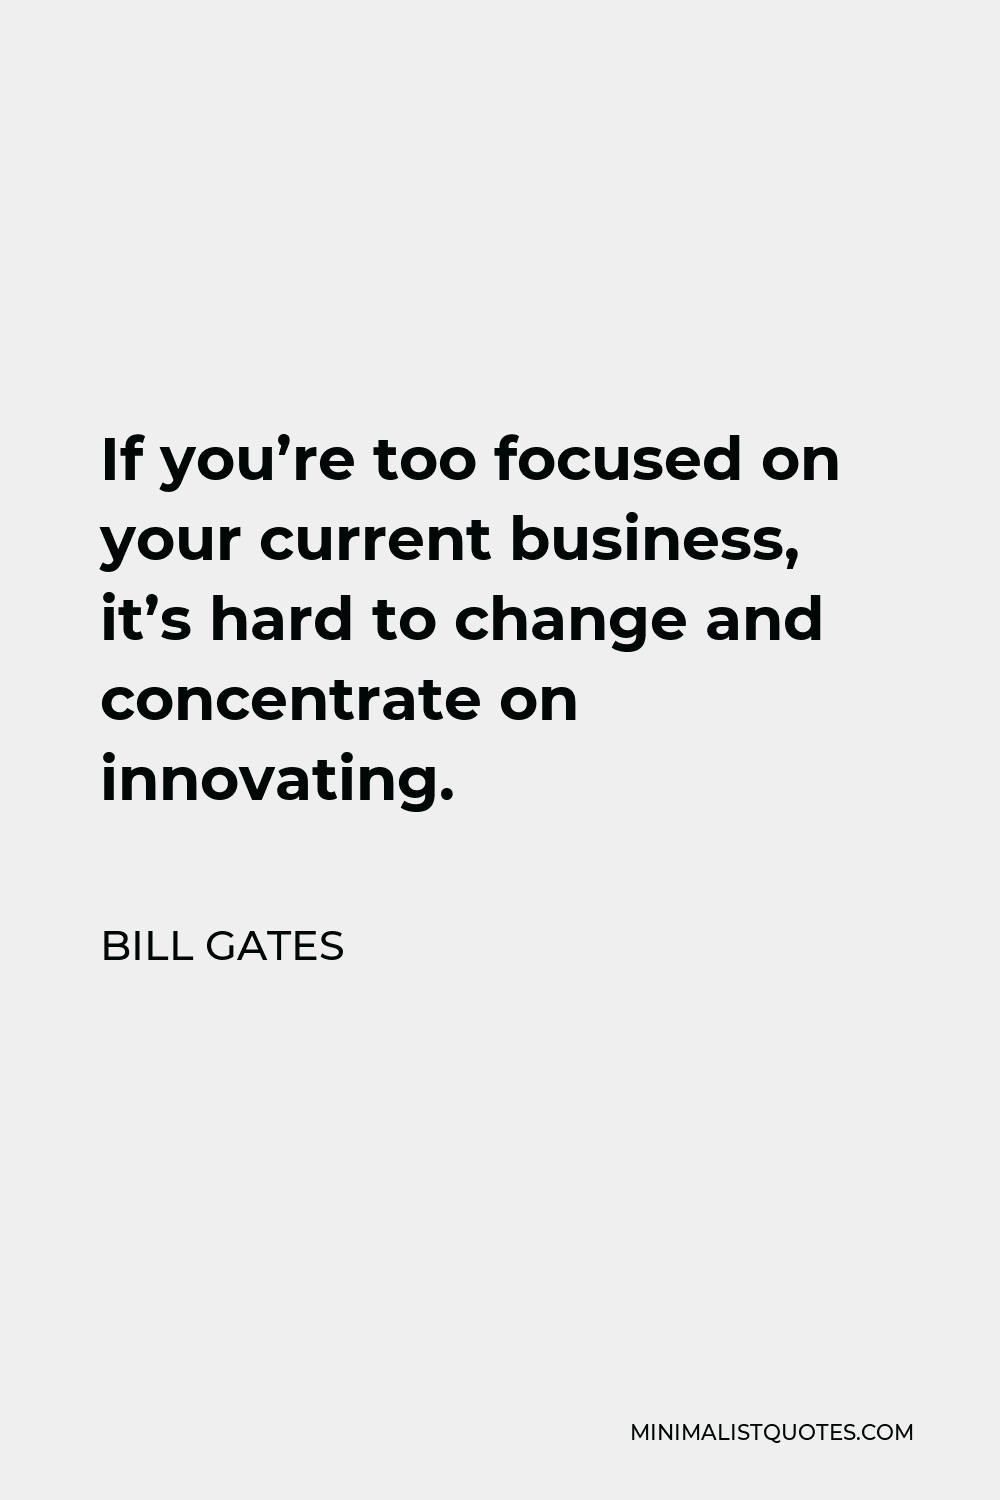 Bill Gates Quote - If you’re too focused on your current business, it’s hard to change and concentrate on innovating.